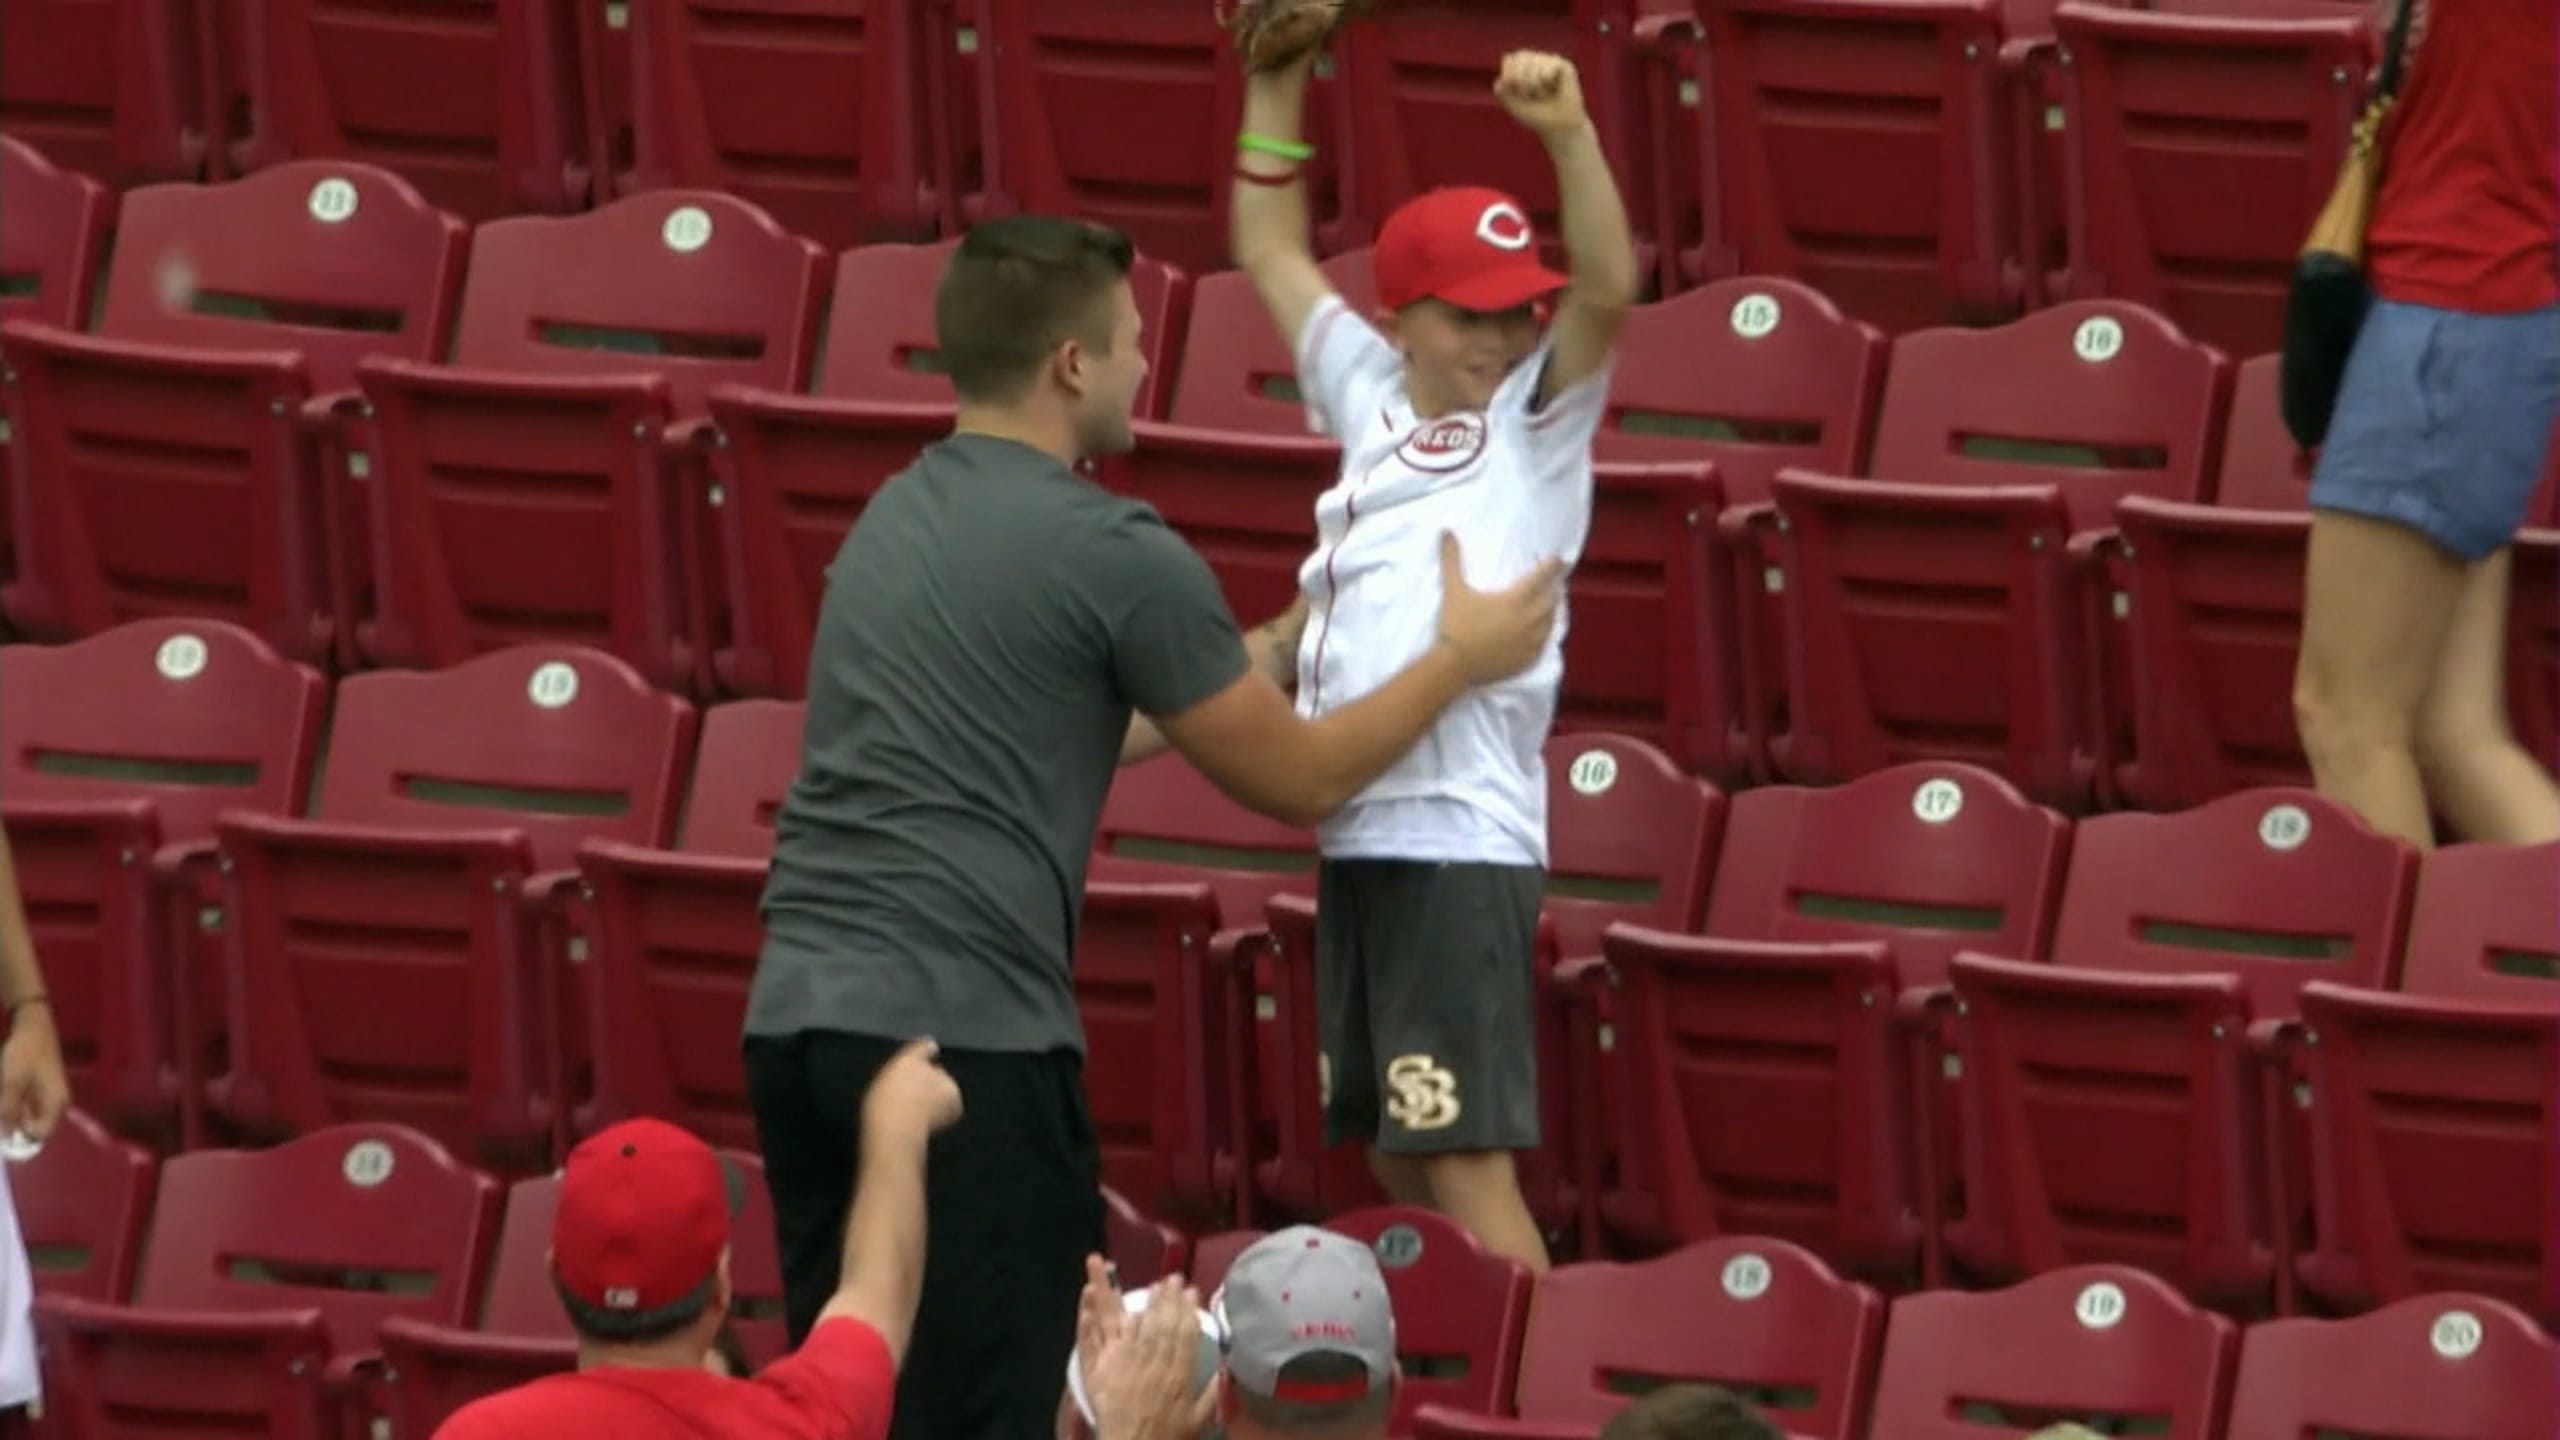 Young Reds fan, saddened by Votto's ejection from game, given signed ball  by player